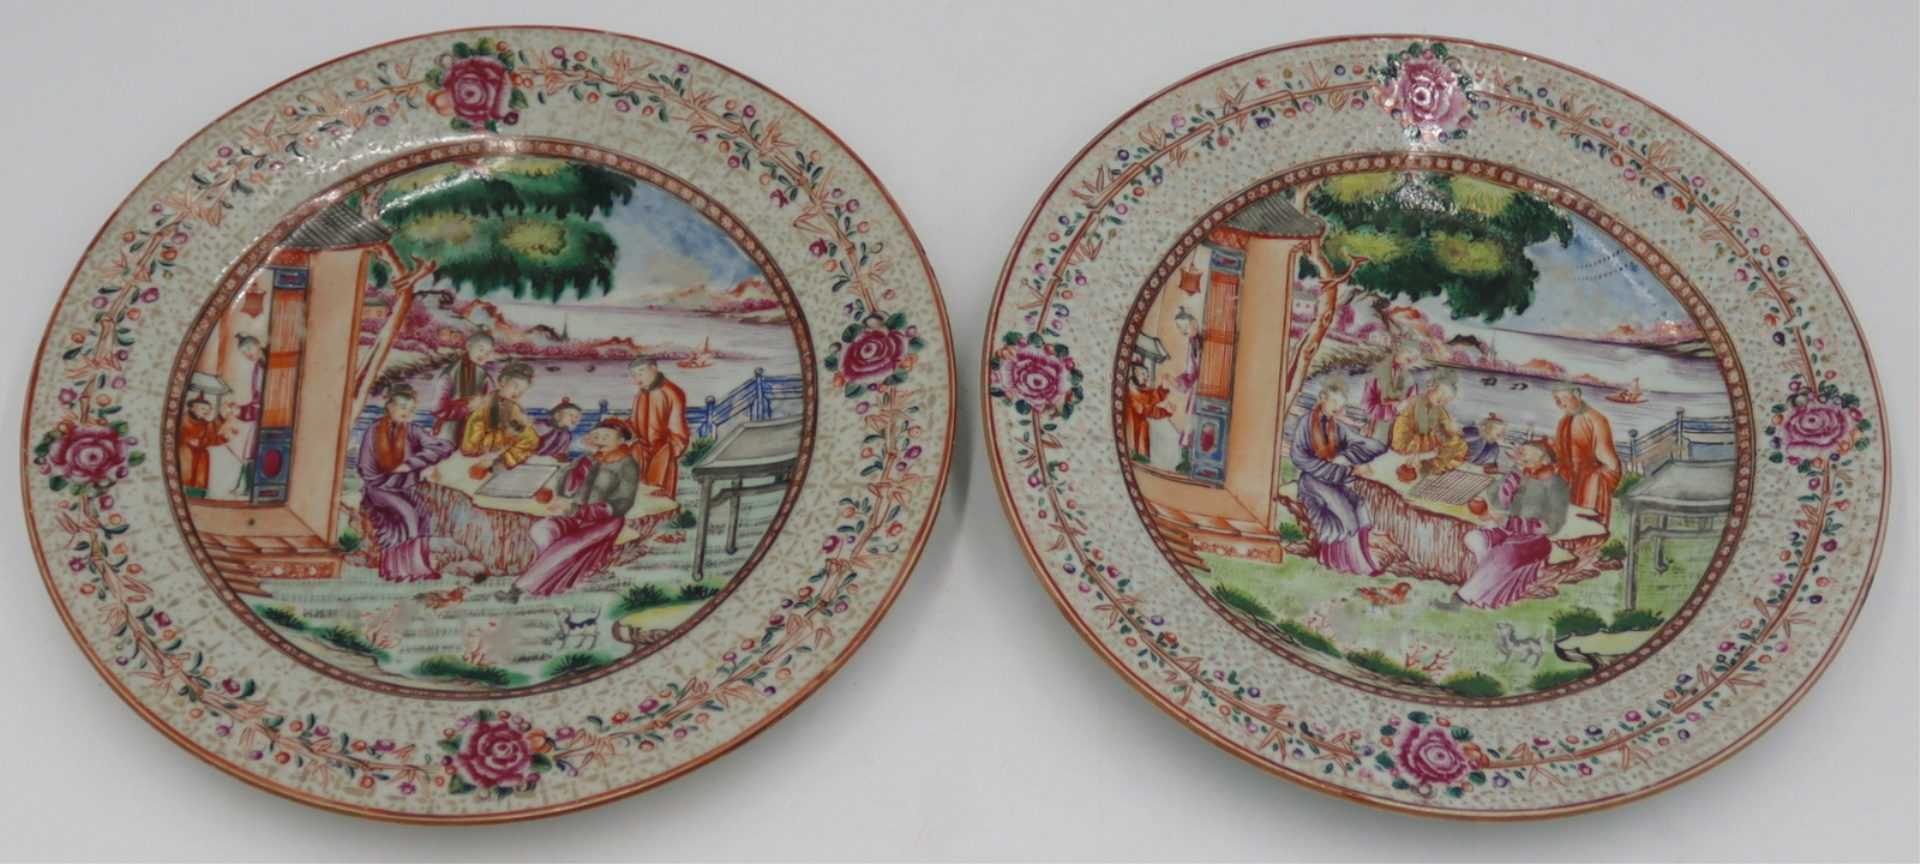 PAIR OF CHINESE EXPORT ENAMEL DECORATED